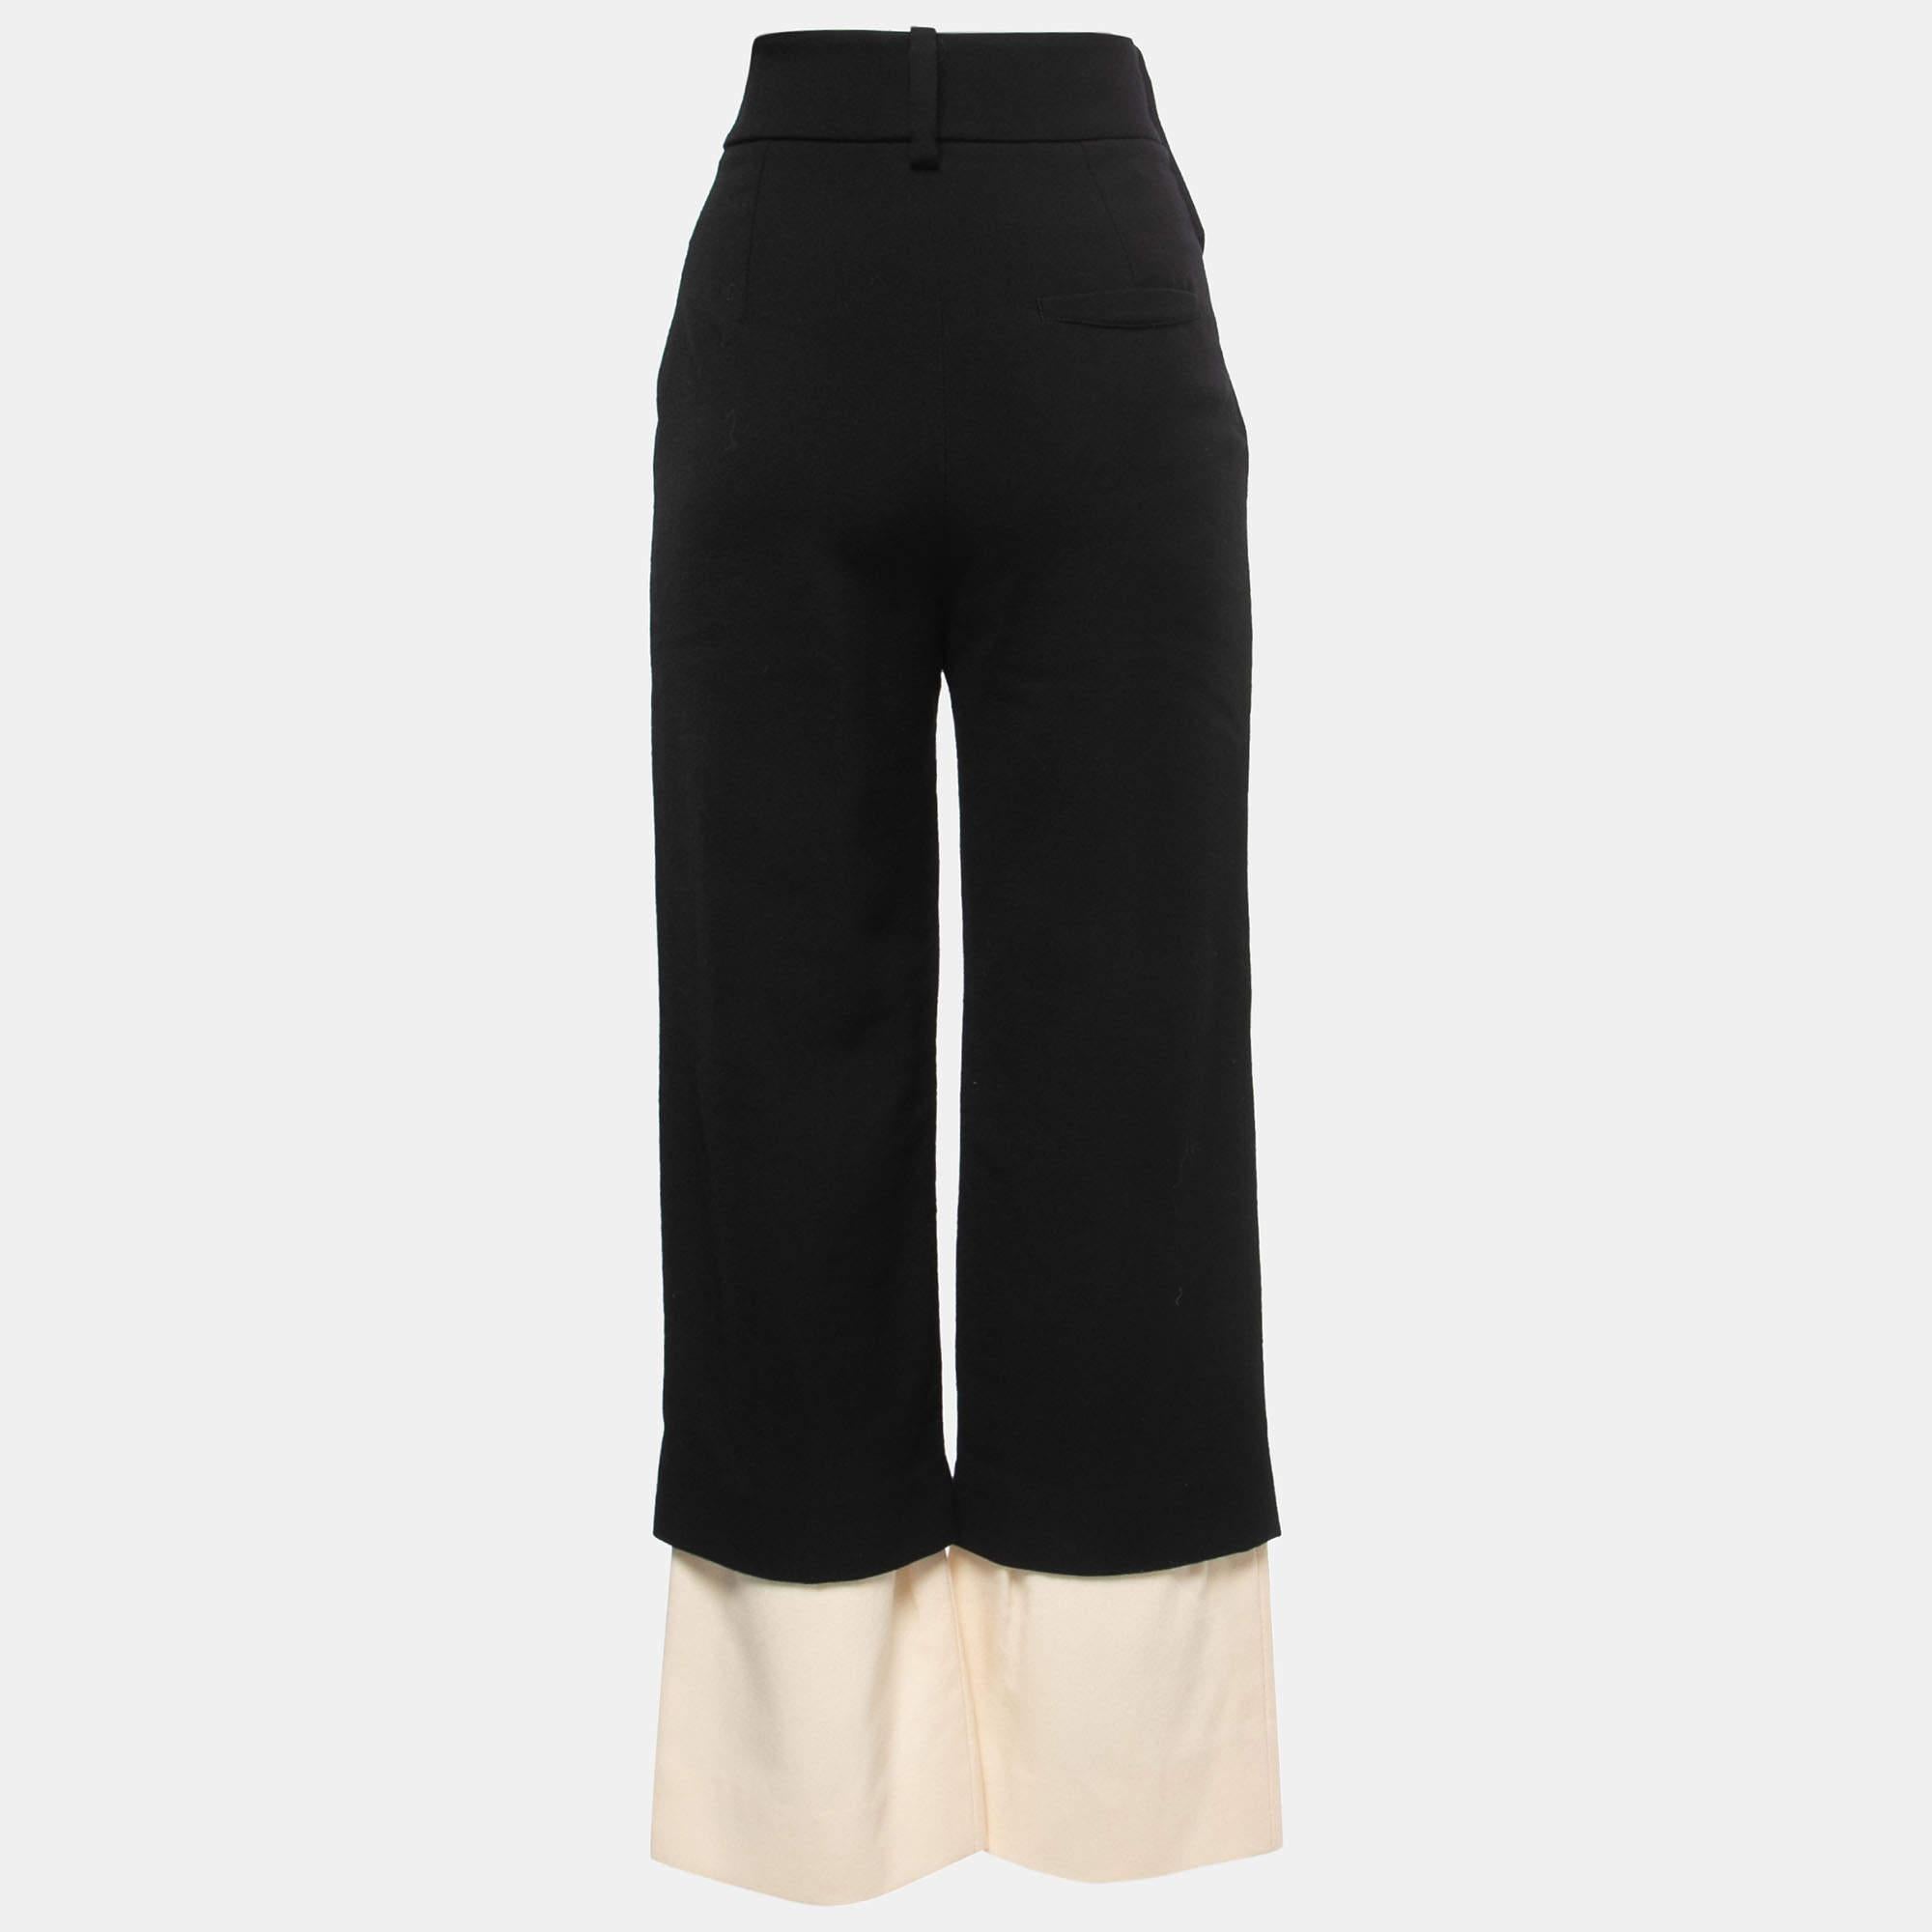 Impeccably tailored pants are a staple in a well-curated wardrobe. These designer trousers are finely sewn to give you the desired look and all-day comfort.

